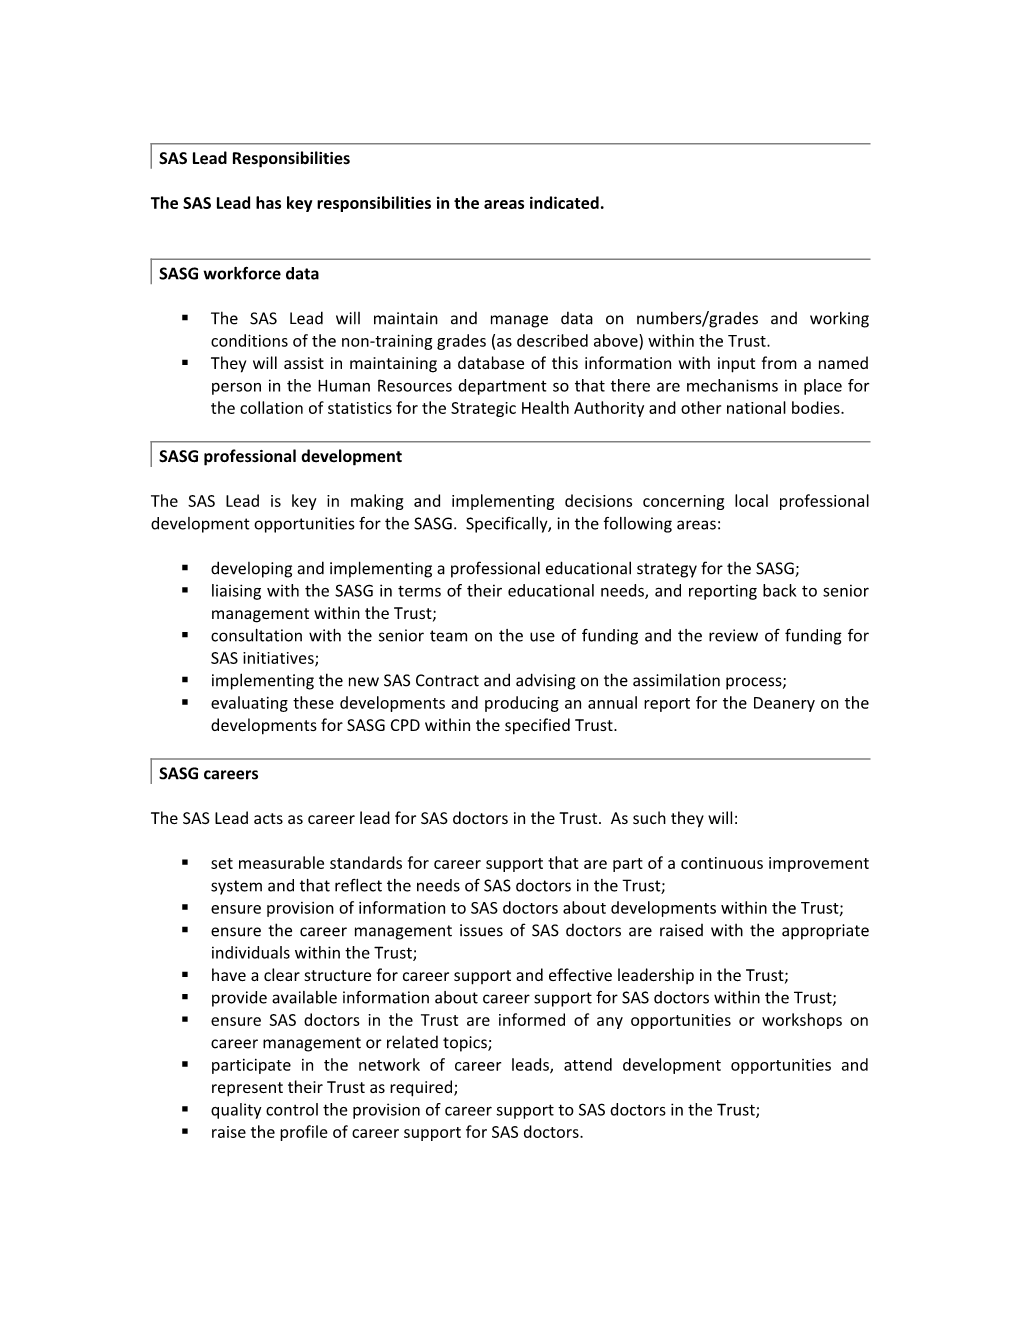 Roles and Responsibilities the SAS Trust Lead